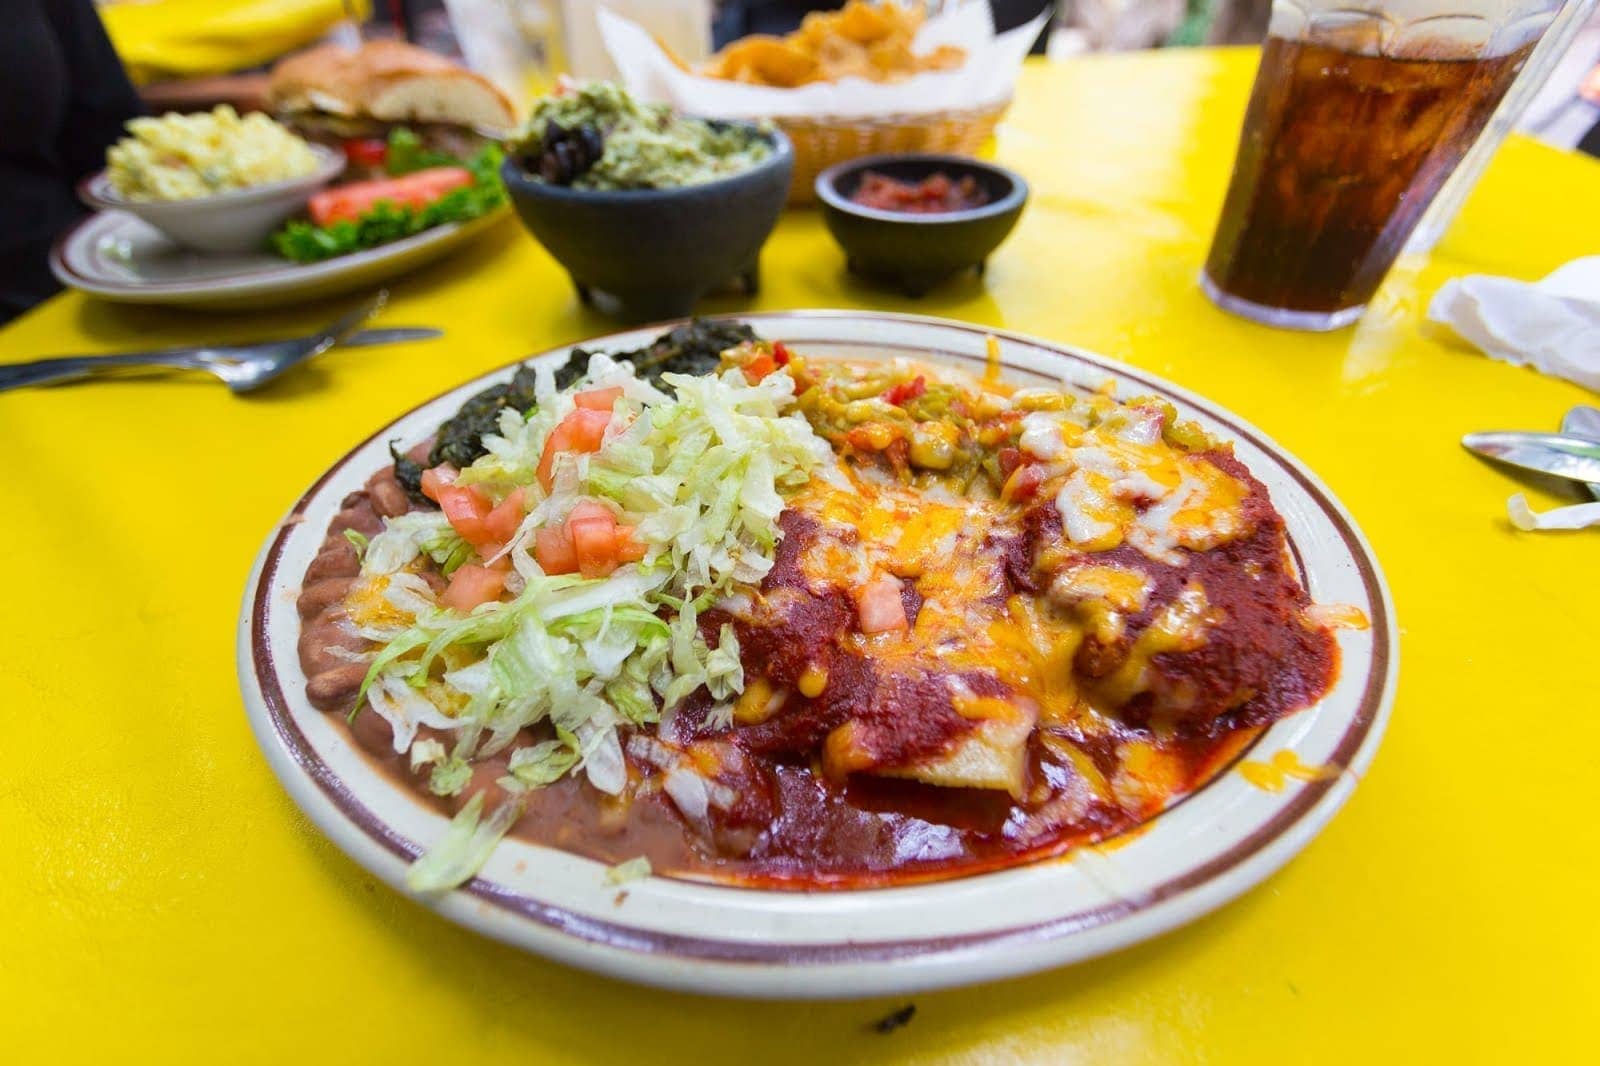 The Best Restaurants in Albuquerque: From Diners to Fine Dining! - Finding the Universe